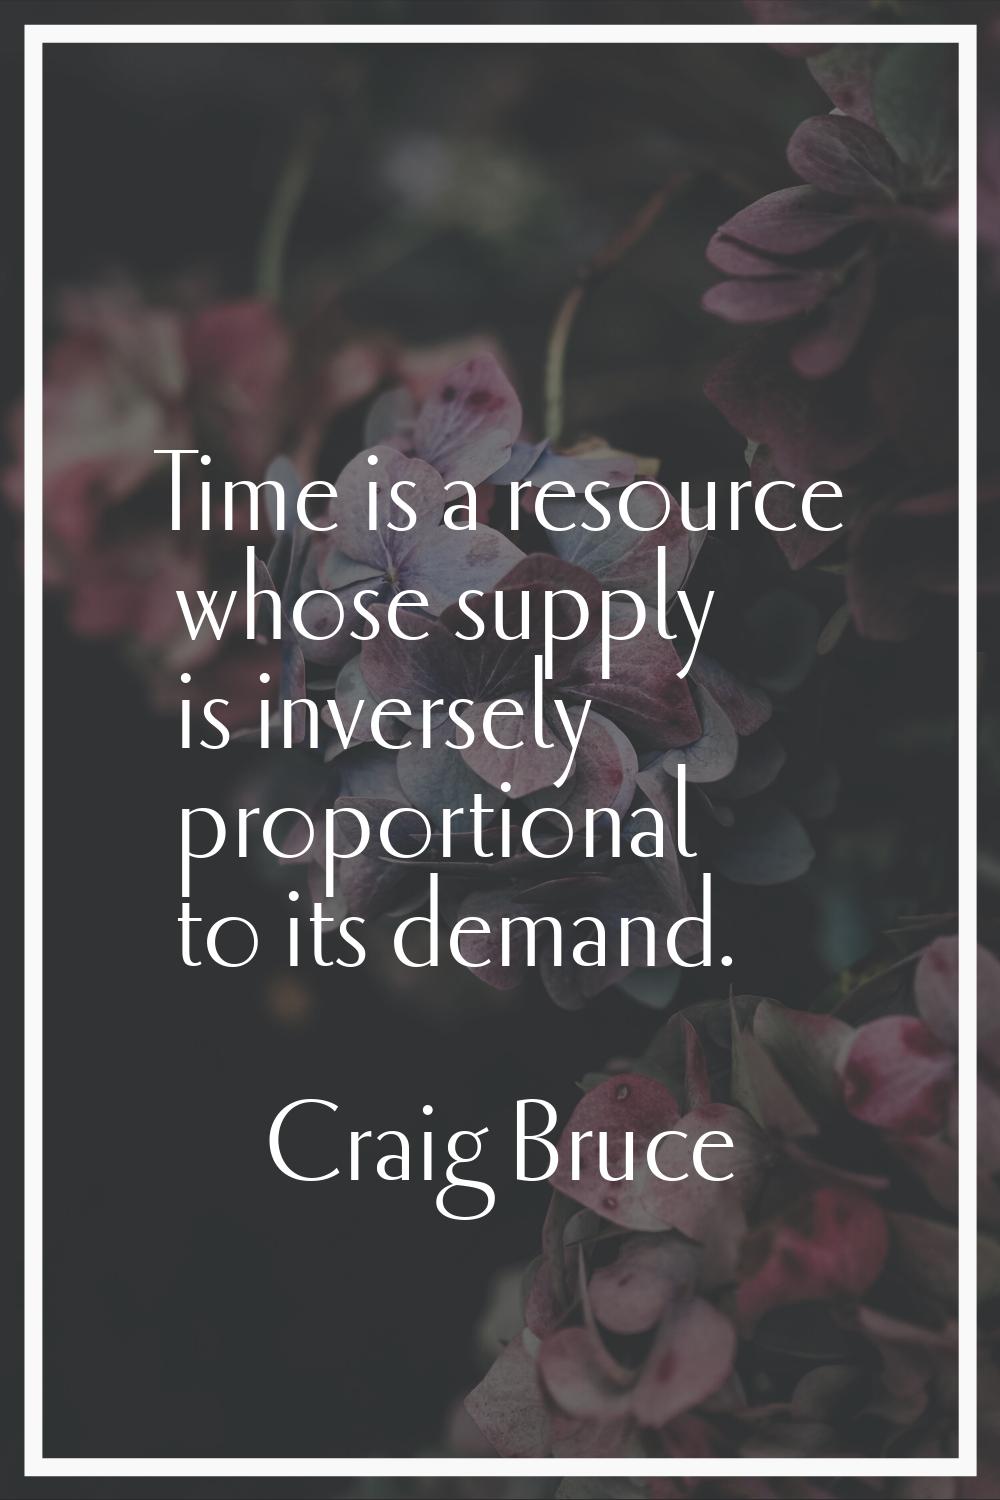 Time is a resource whose supply is inversely proportional to its demand.